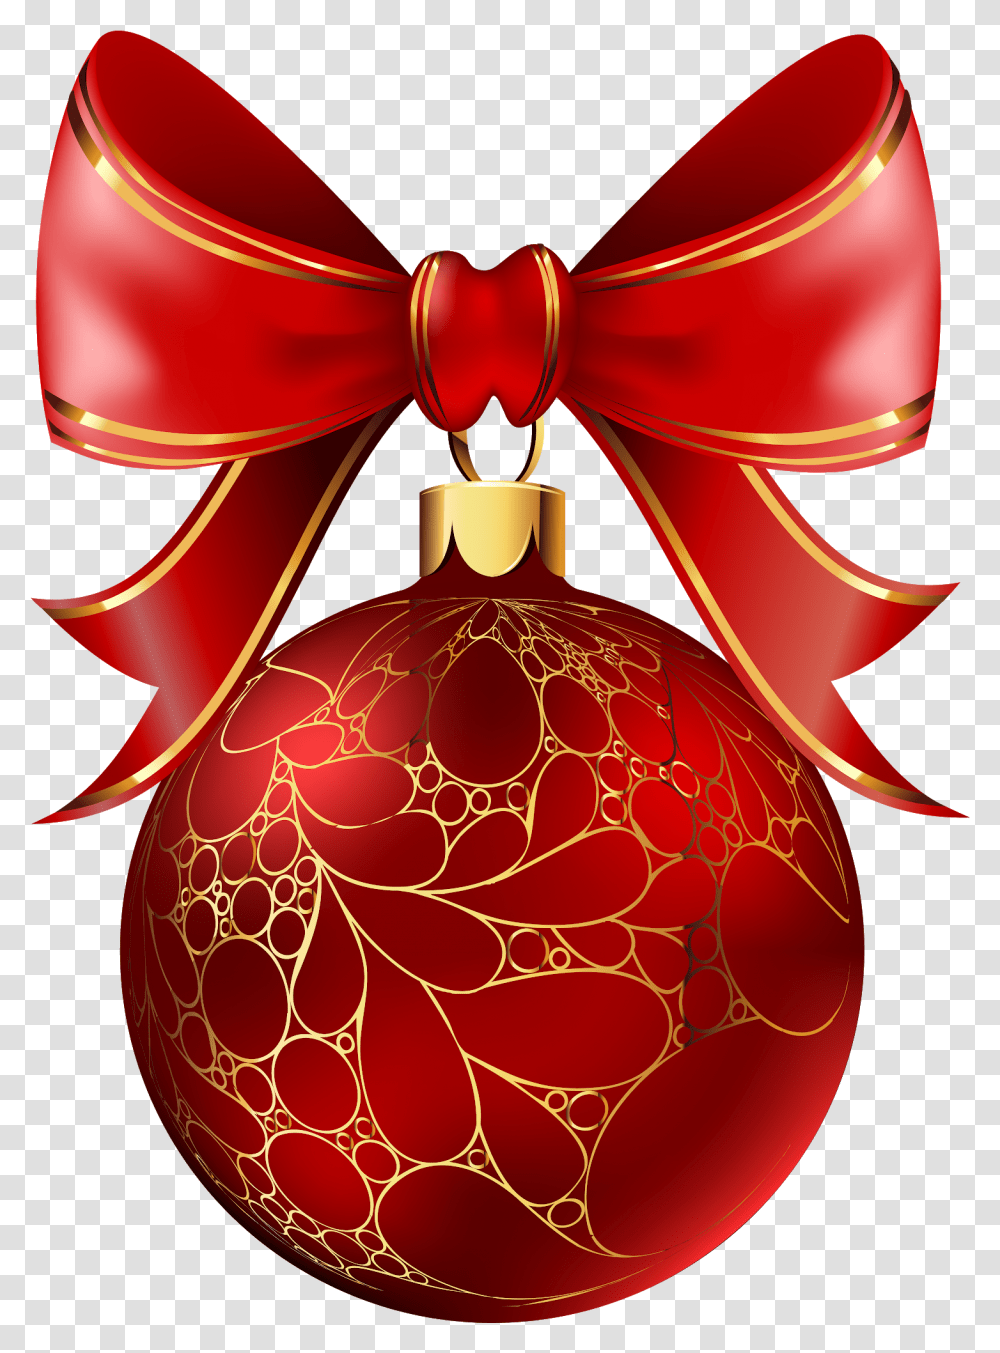 Christmas Hanging Ball Christmas Image & Clipart Christmas Bauble With Bow, Ornament, Pattern, Lamp, Fractal Transparent Png